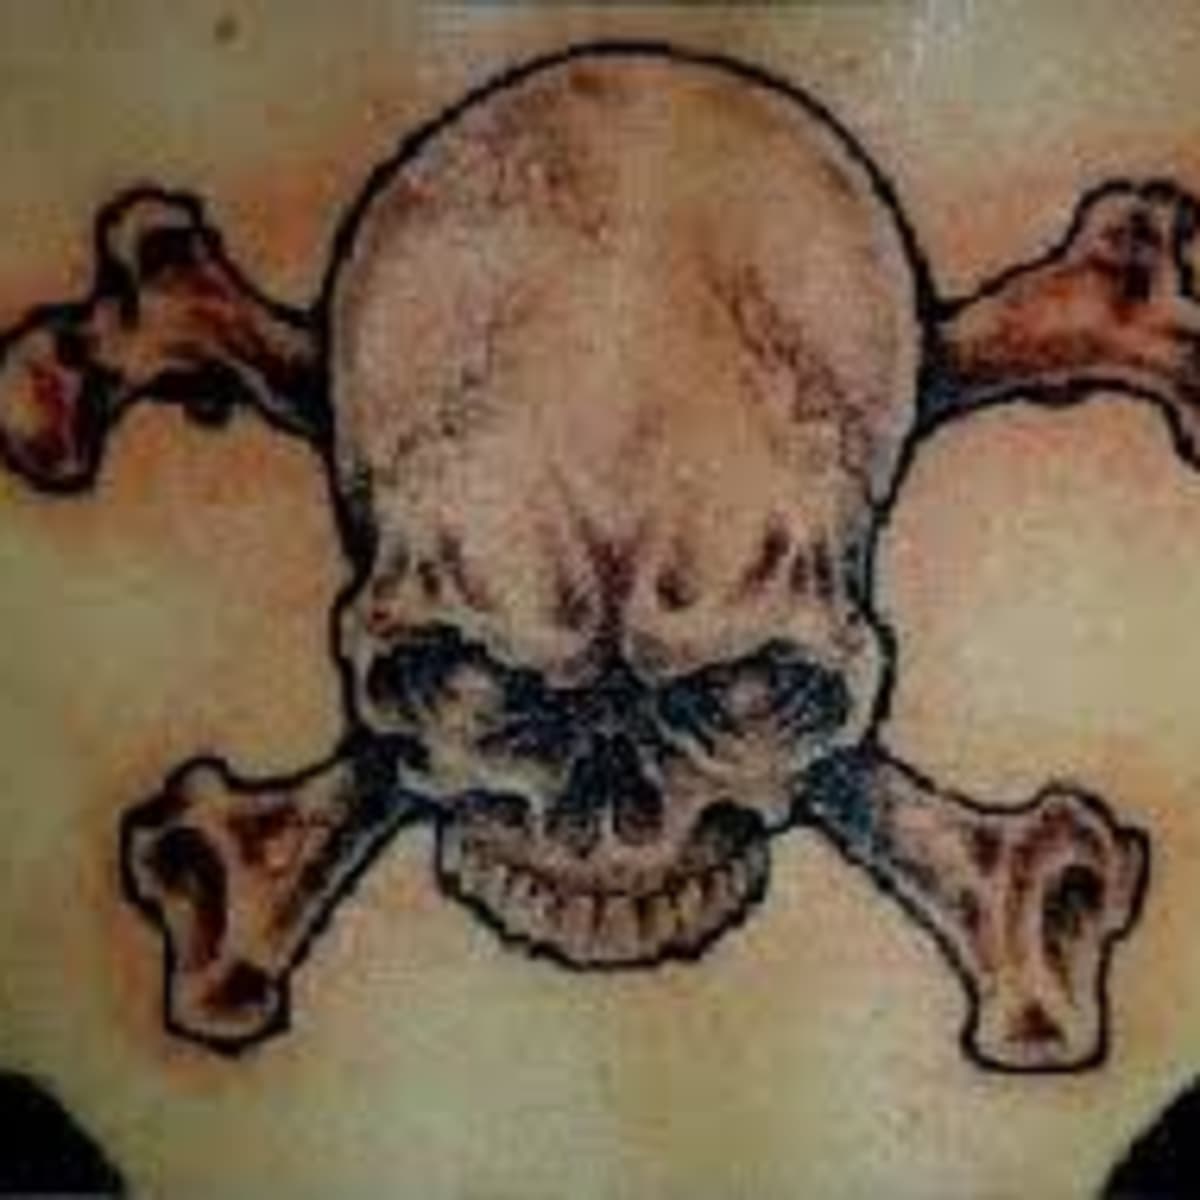 214 Skull And Crossbone Tattoos Photos and Premium High Res Pictures   Getty Images